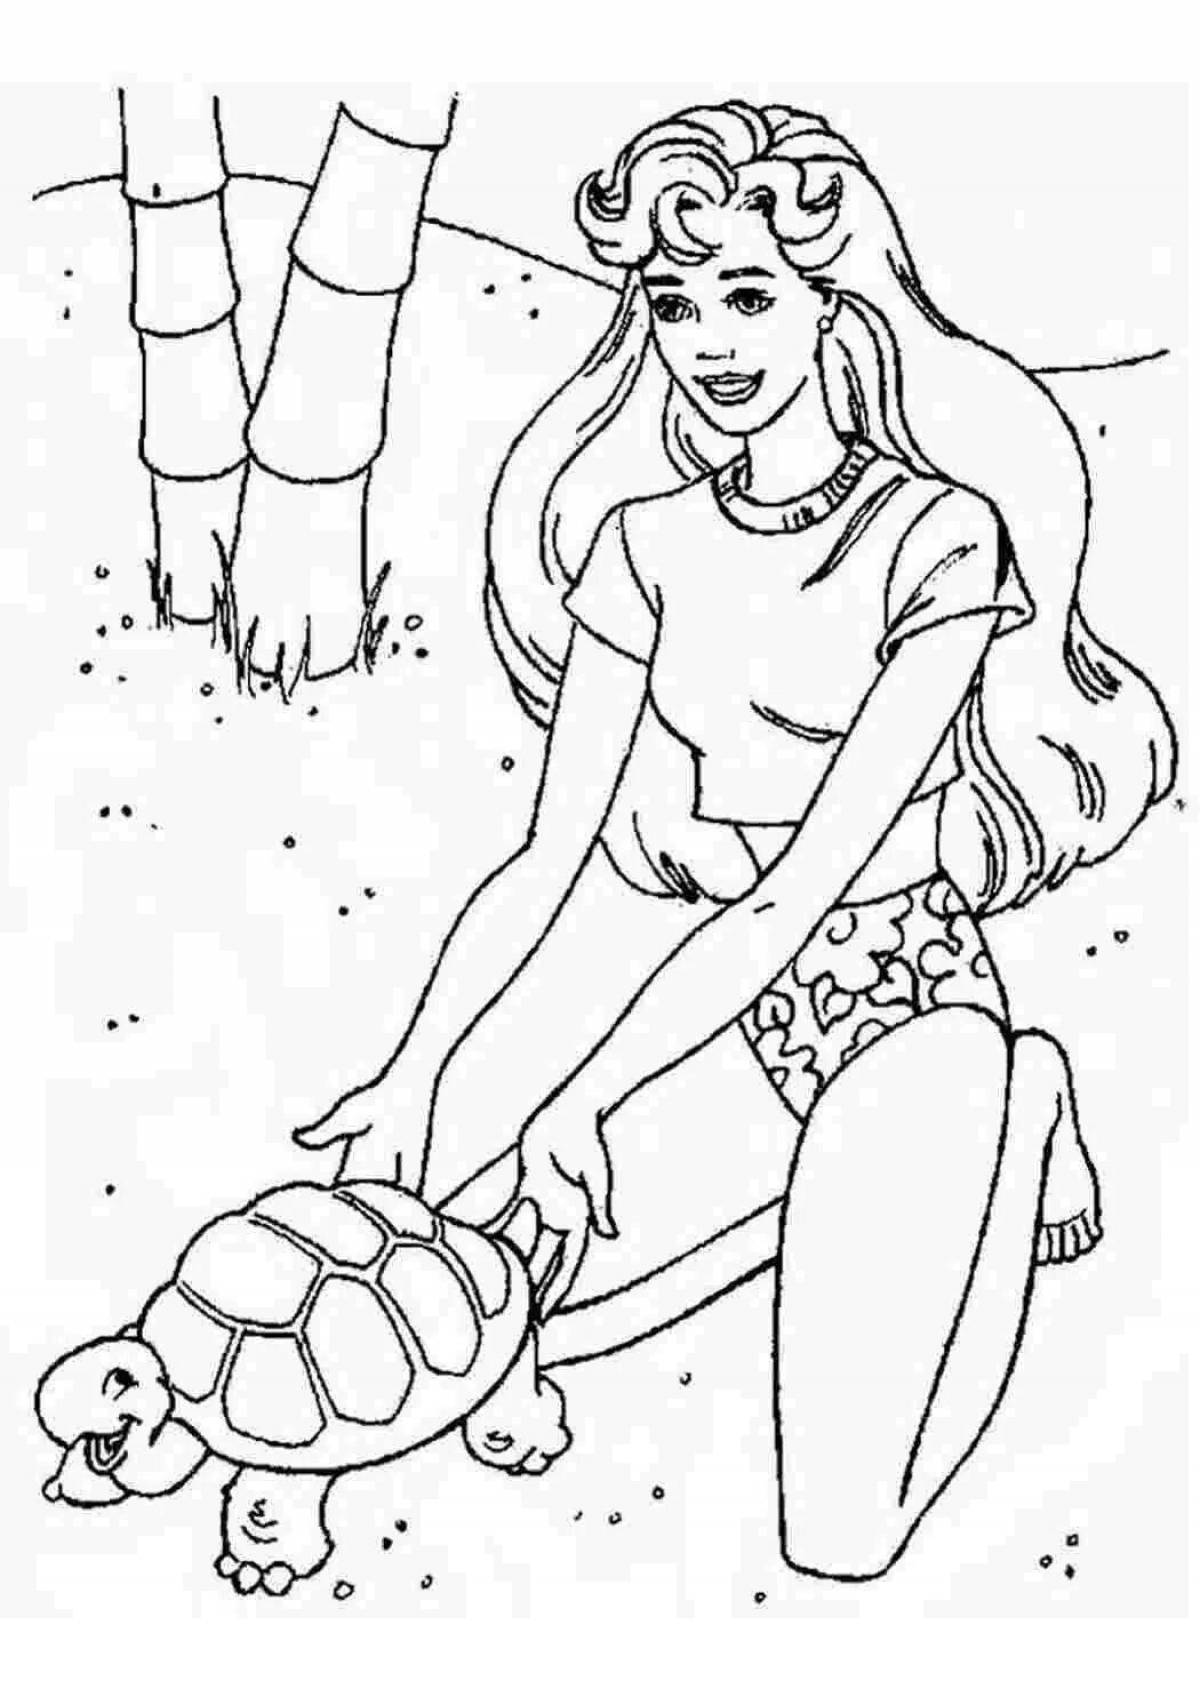 Colorful 90s barbie coloring book